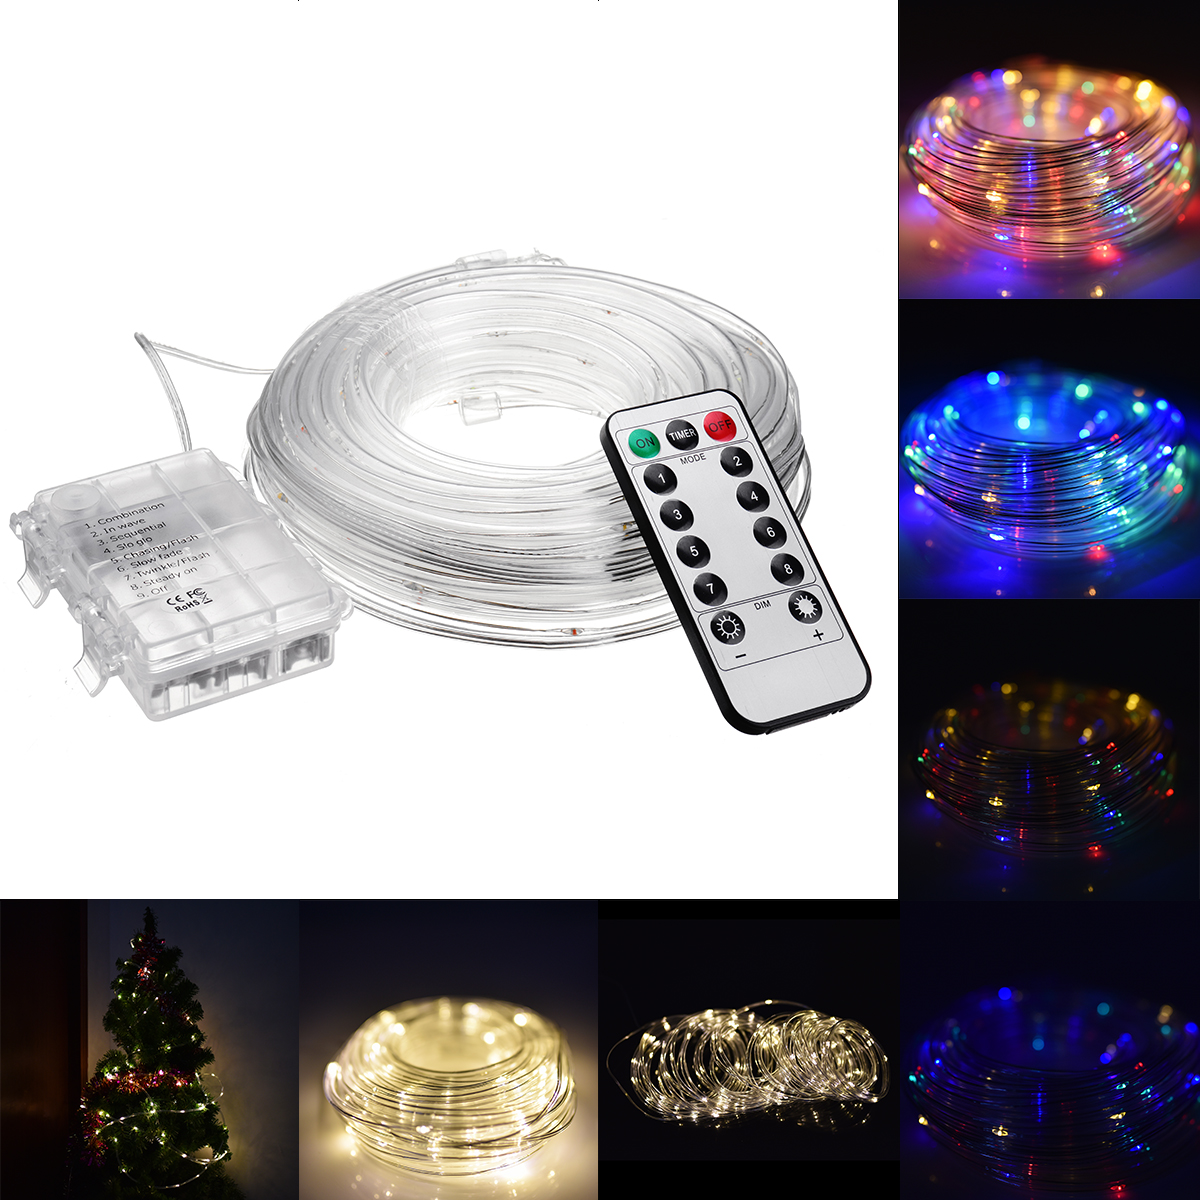 12M-Battery-Powered-120LED-String-Light-8-Modes-Remote-Control-Fairy-Lamp-Party-Christmas-Home-Decor-1351130-1